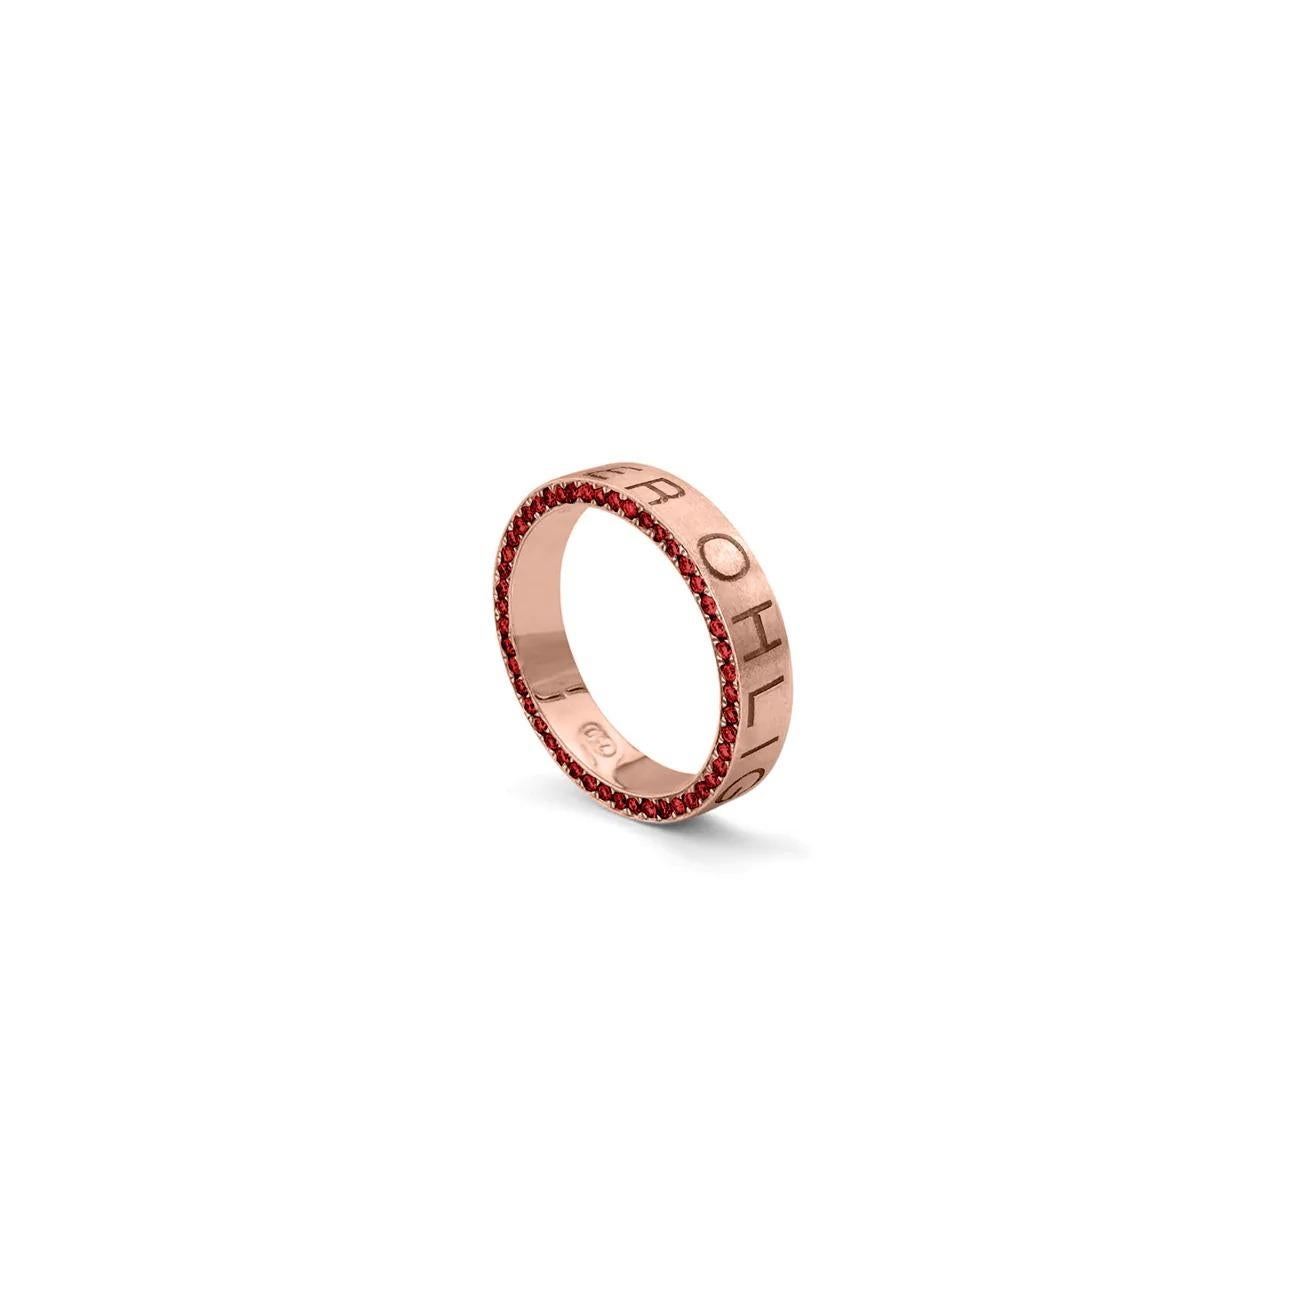 For Sale:  Eternity band wedding band in 18ct Rose Gold with Rubies  4